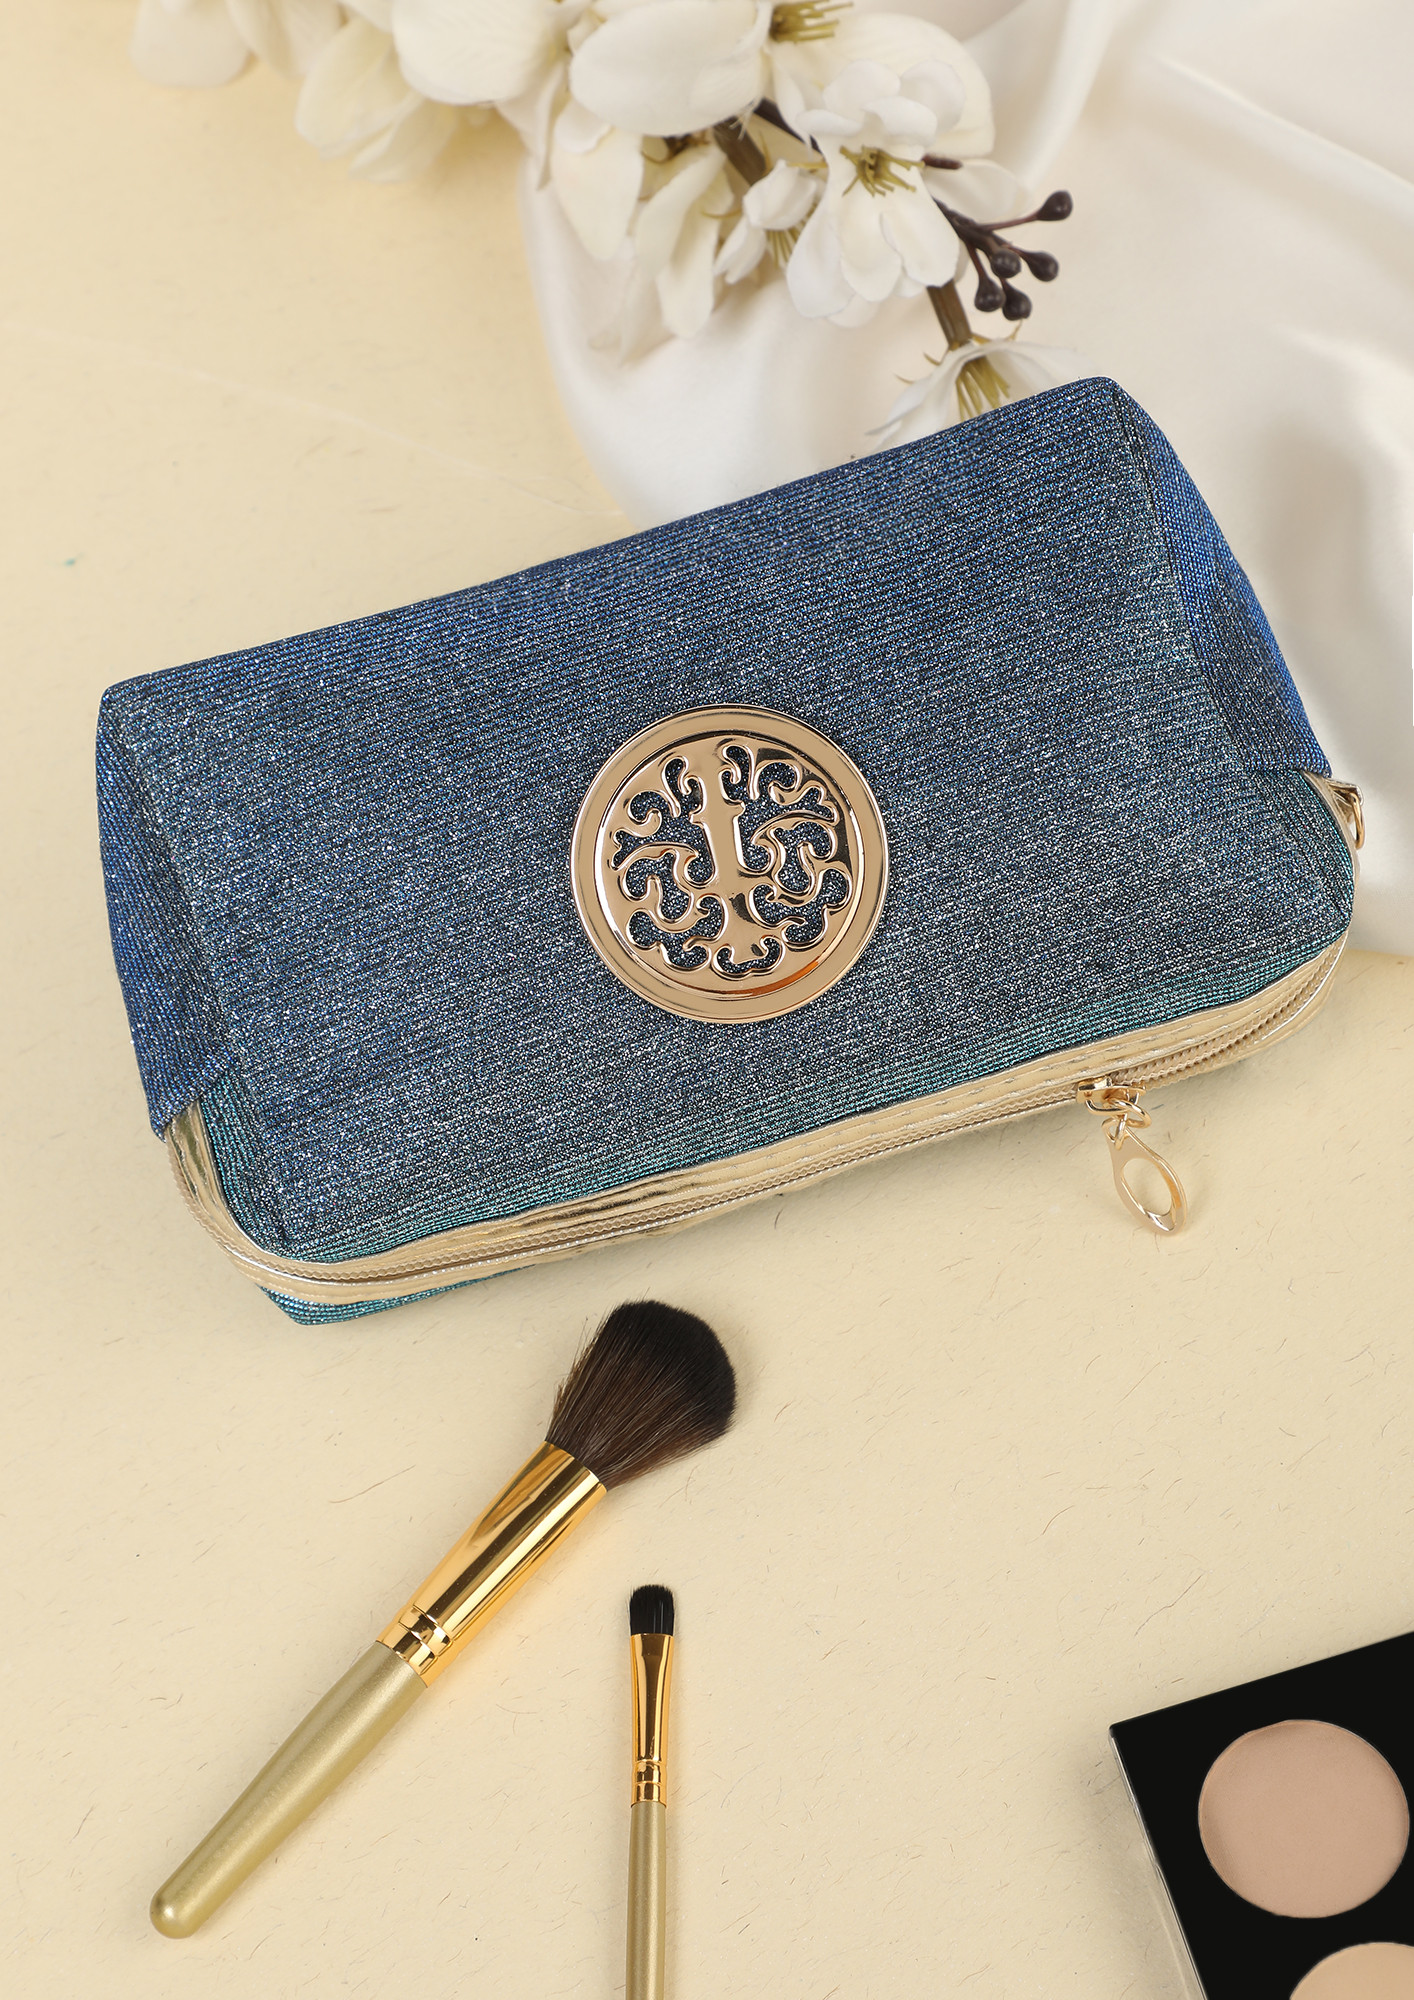 CENTER OF LOVE BLUE MAKE-UP POUCH